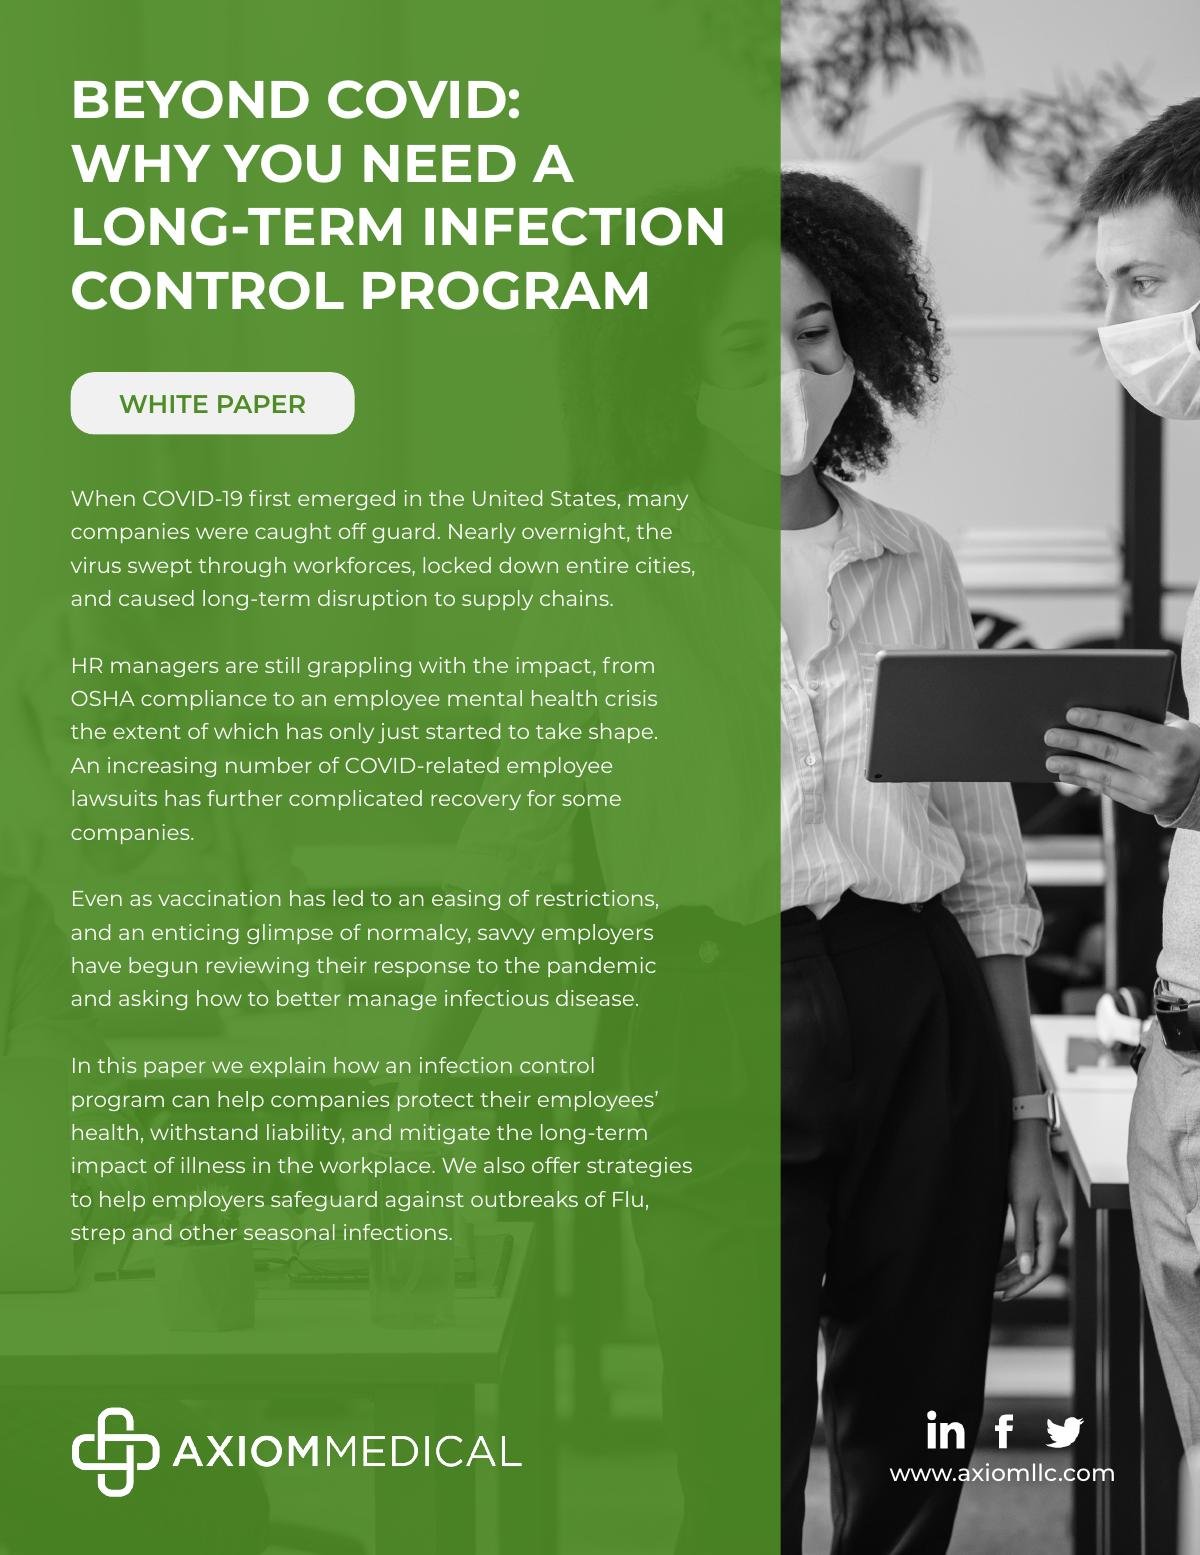 Beyond COVID: Why You Need a Long Term Infection Control Program